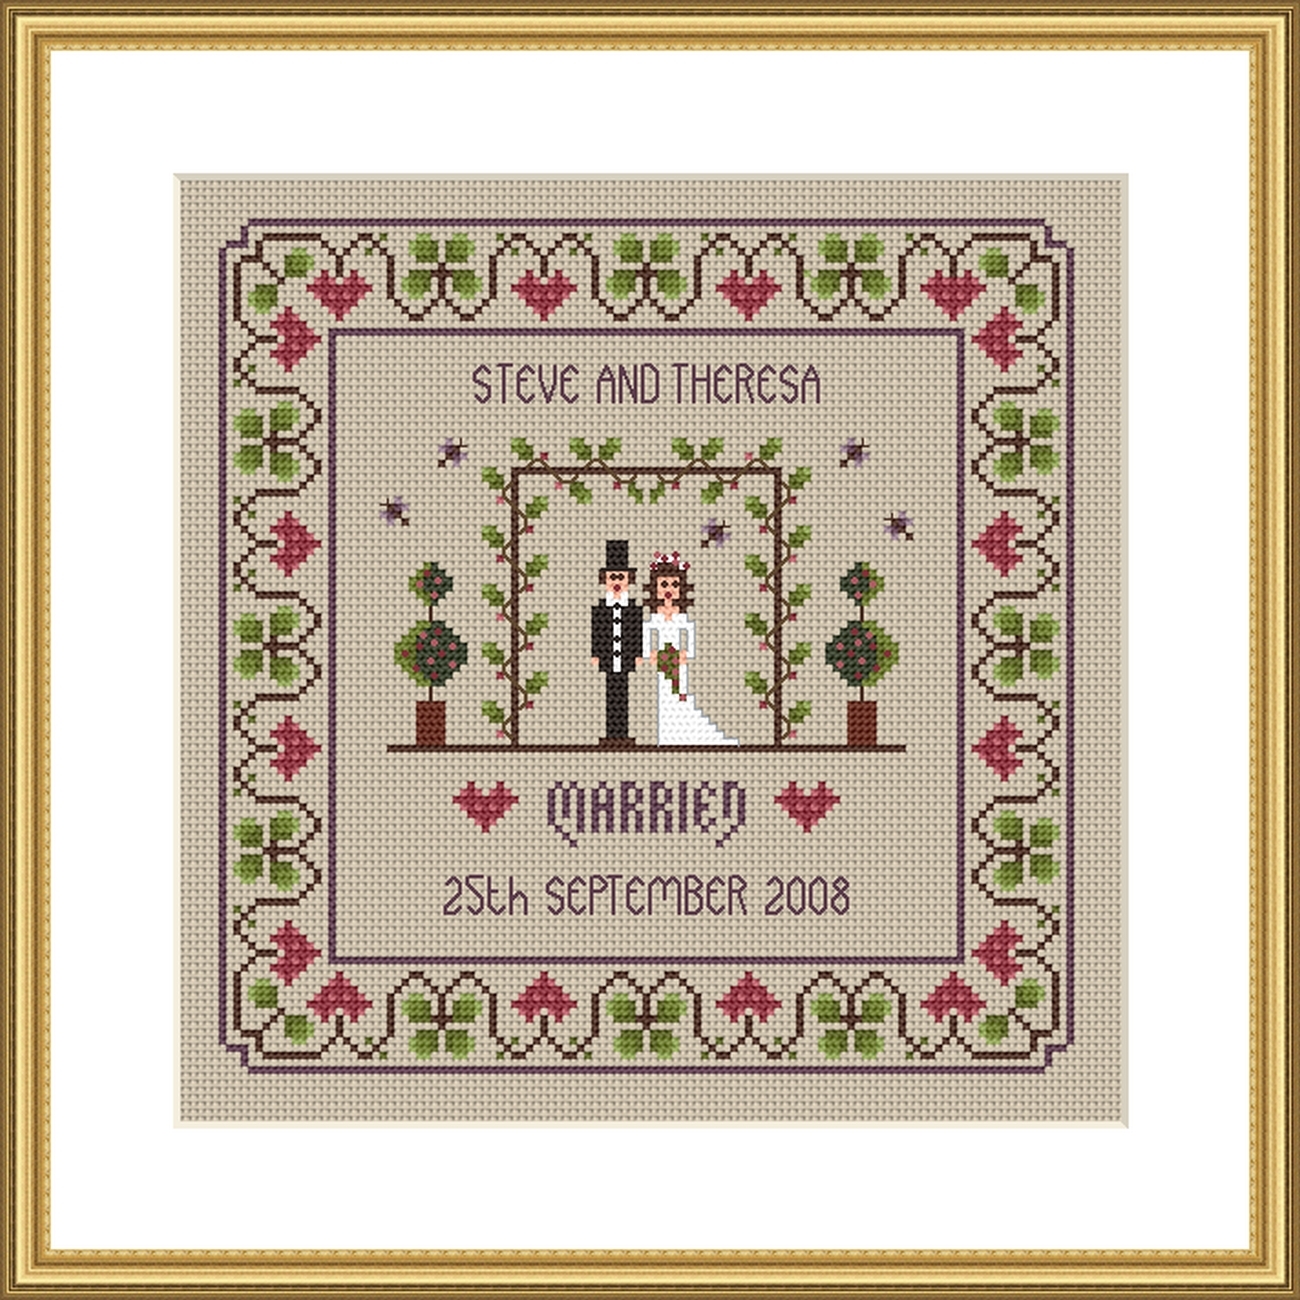 The Wedding marriage cross stitch chart Little Dove Designs - Other